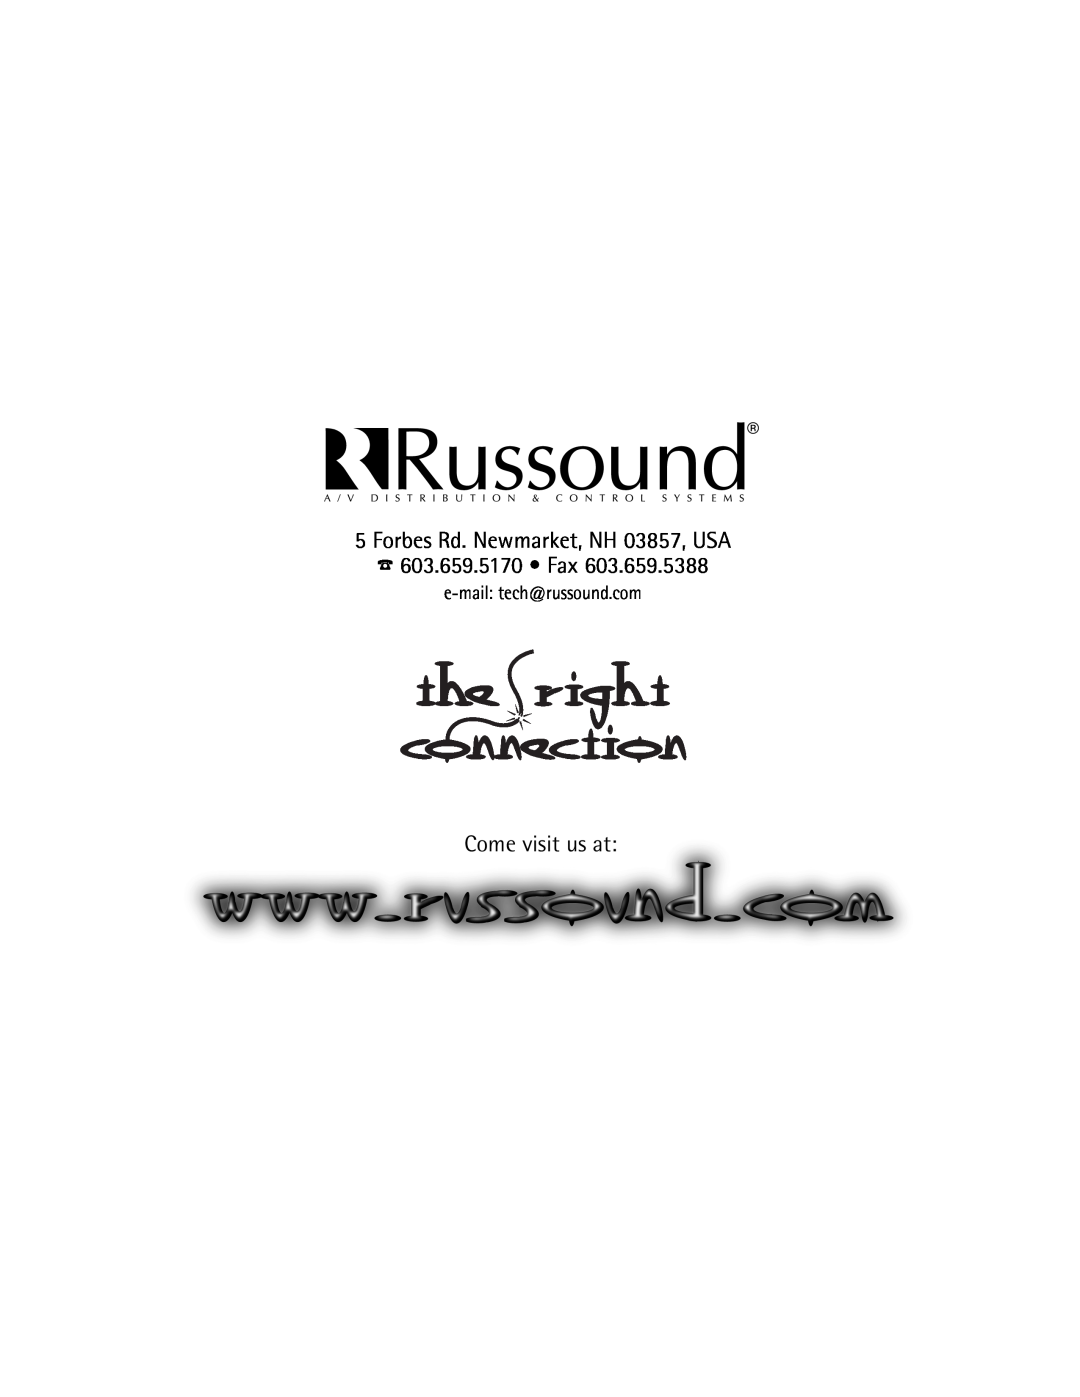 Russound Speakers Forbes Rd. Newmarket, NH 03857, USA 603.659.5170 Fax, Come visit us at, e-mail tech@russound.com 